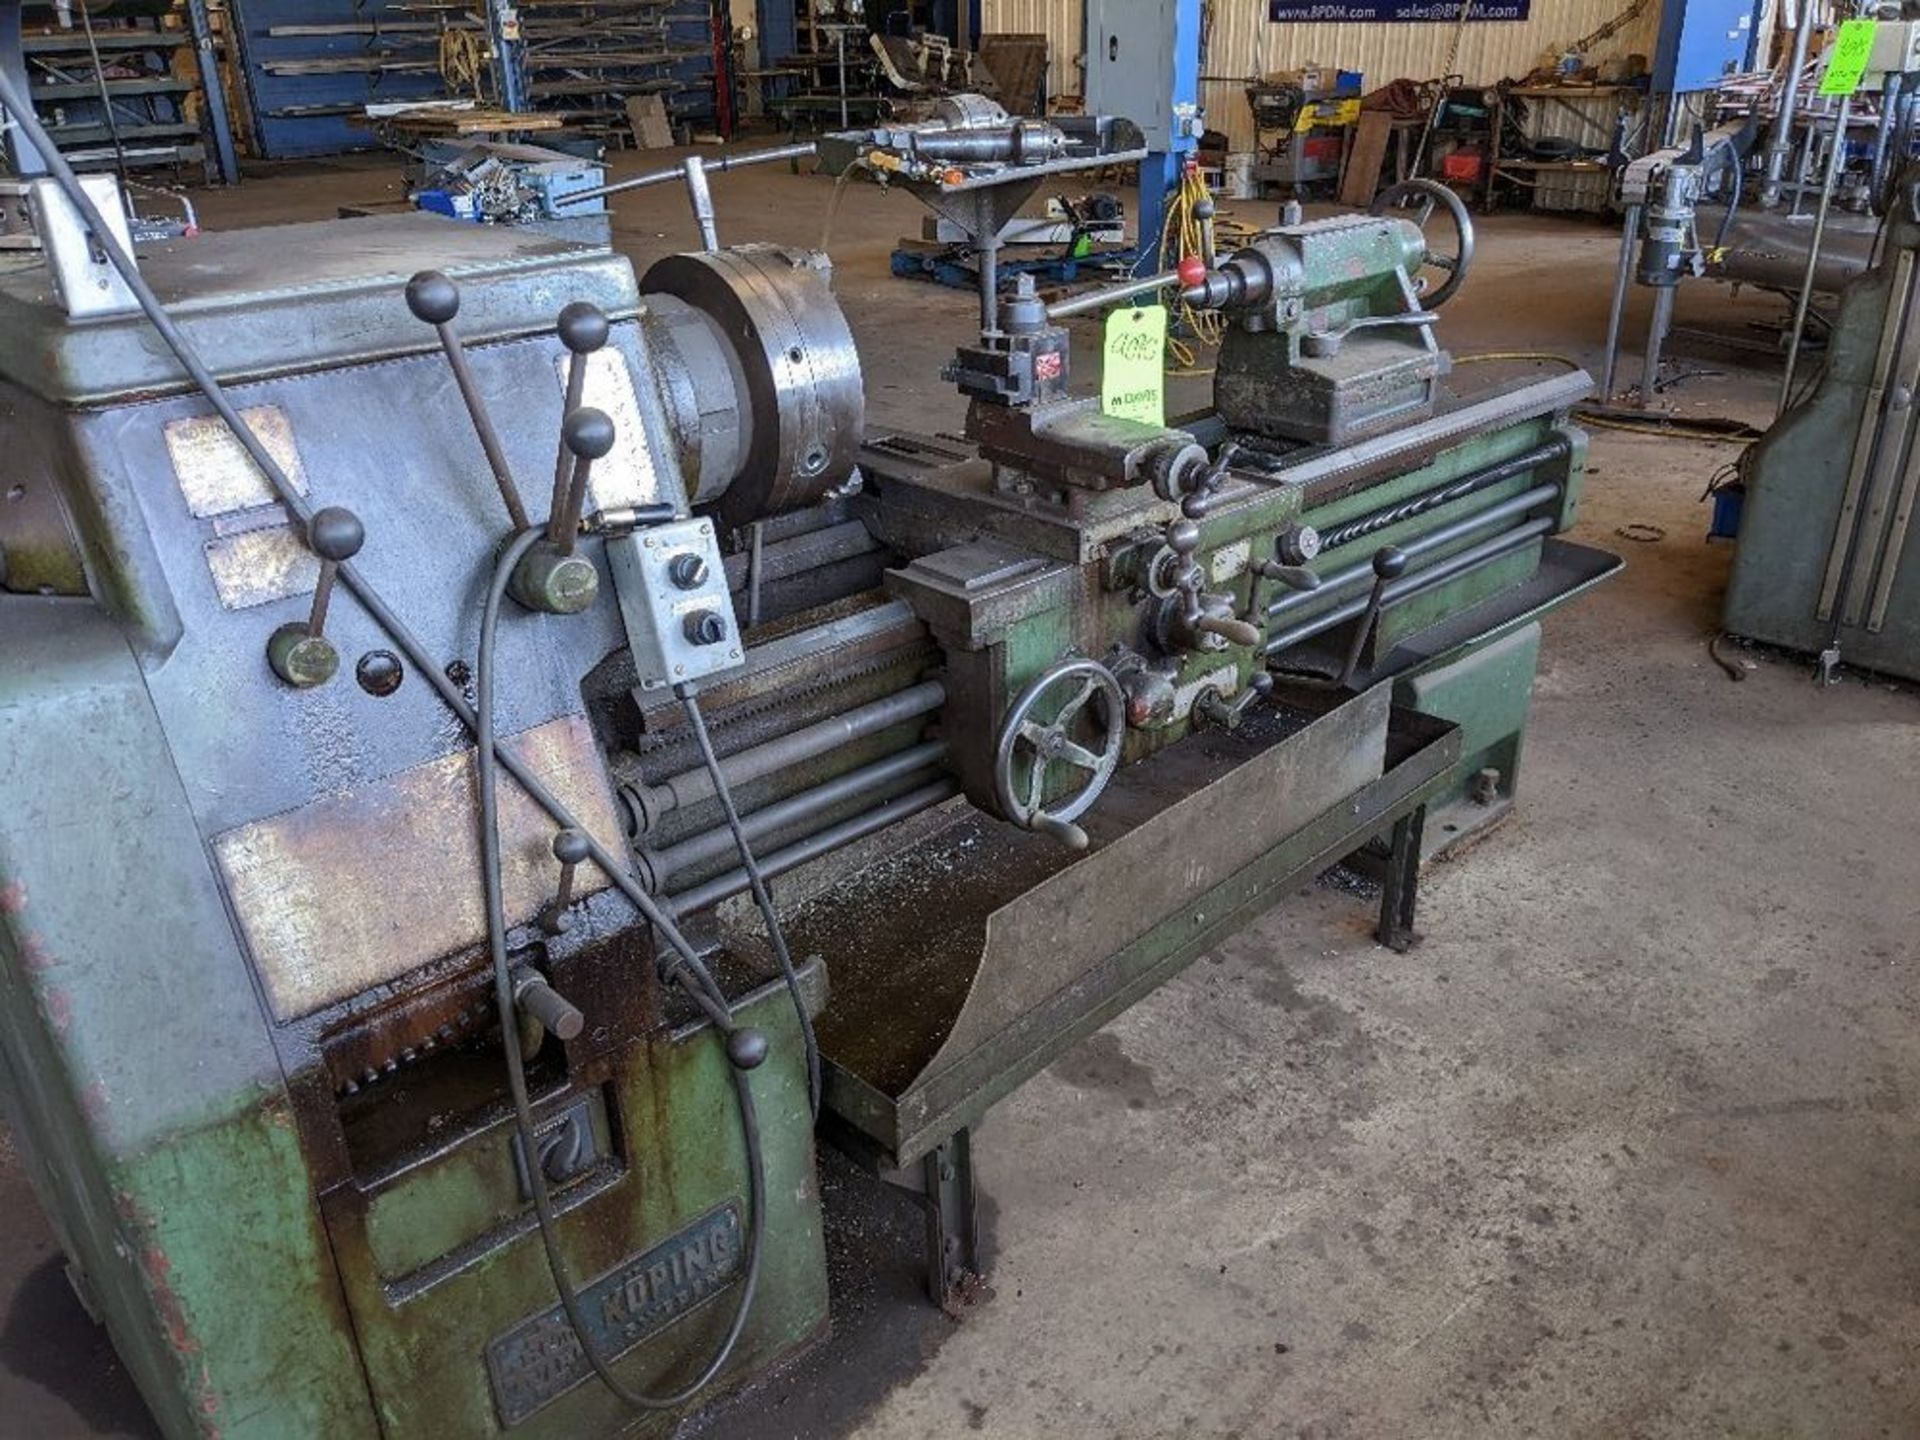 Heavy Duty Lathe – Manufactured by Köping Model: S10S-V1 - 76” Long Bed – 56” Travel for X-Axis - Image 3 of 14